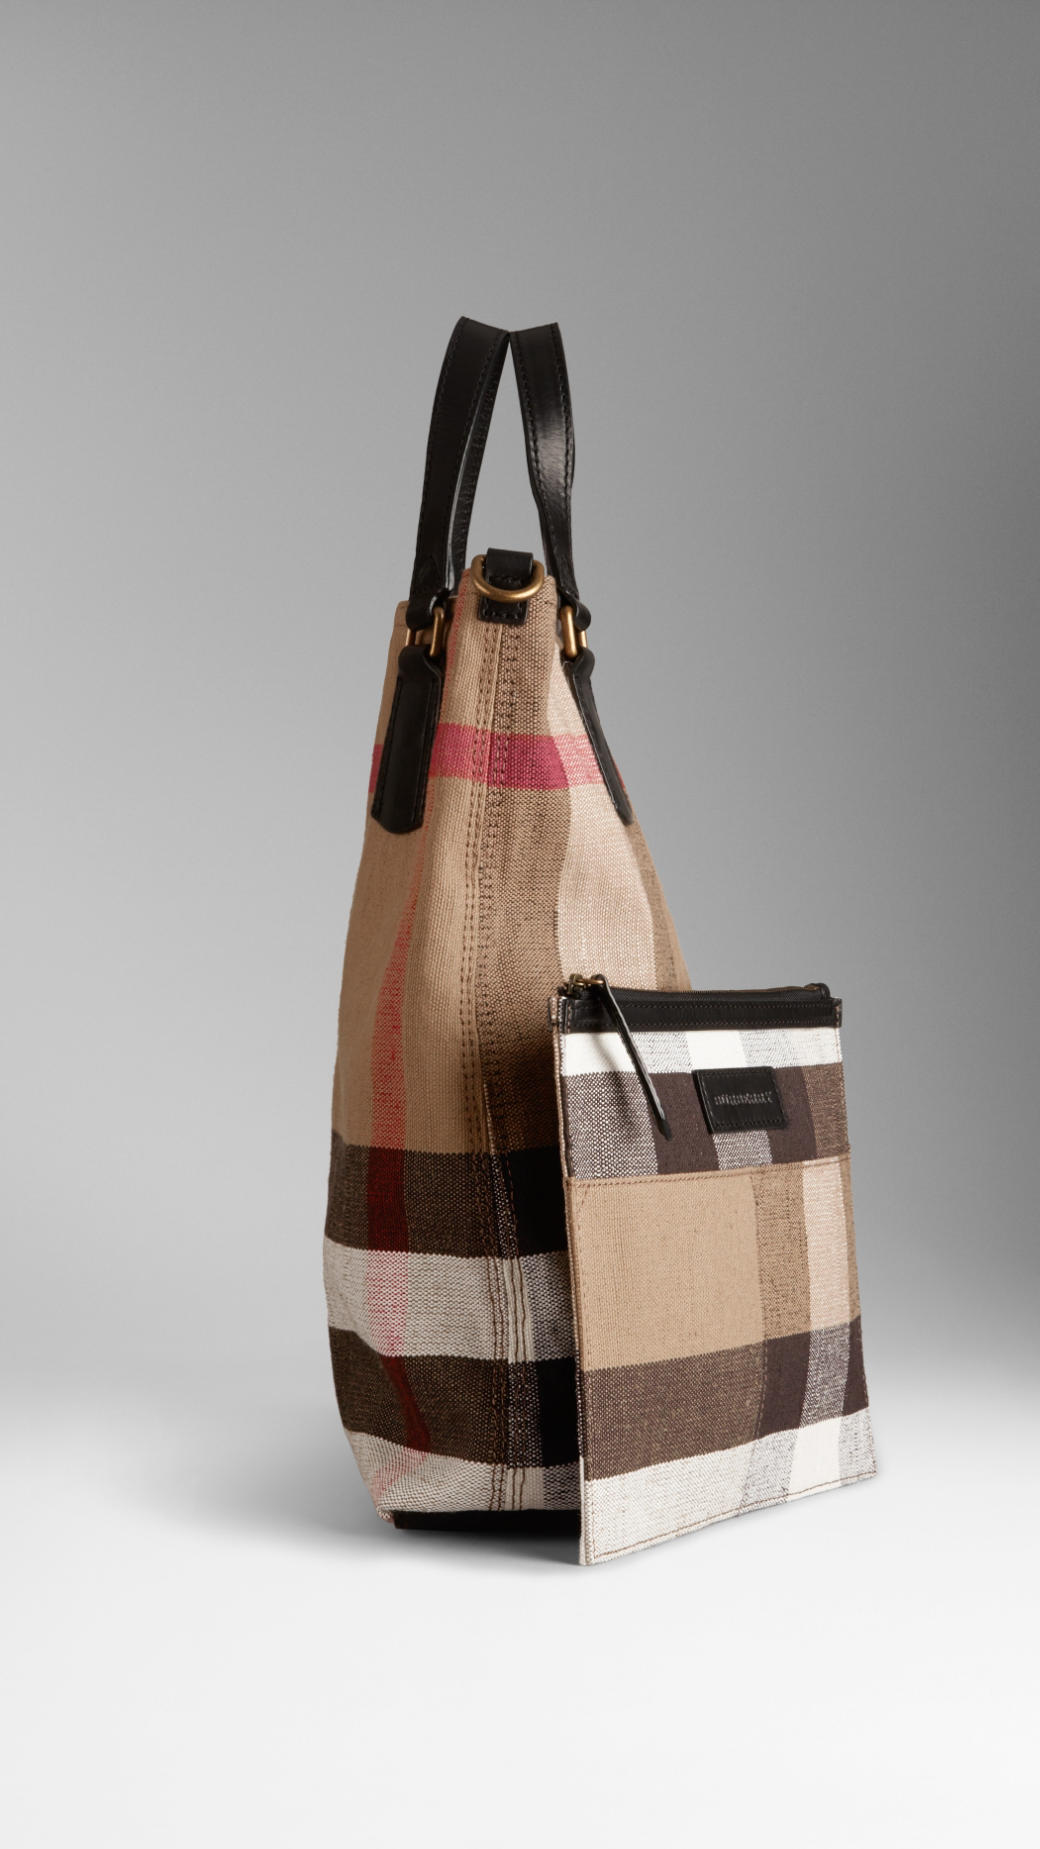 Burberry Medium Canvas Check Tote Bag in Black (Brown) - Lyst